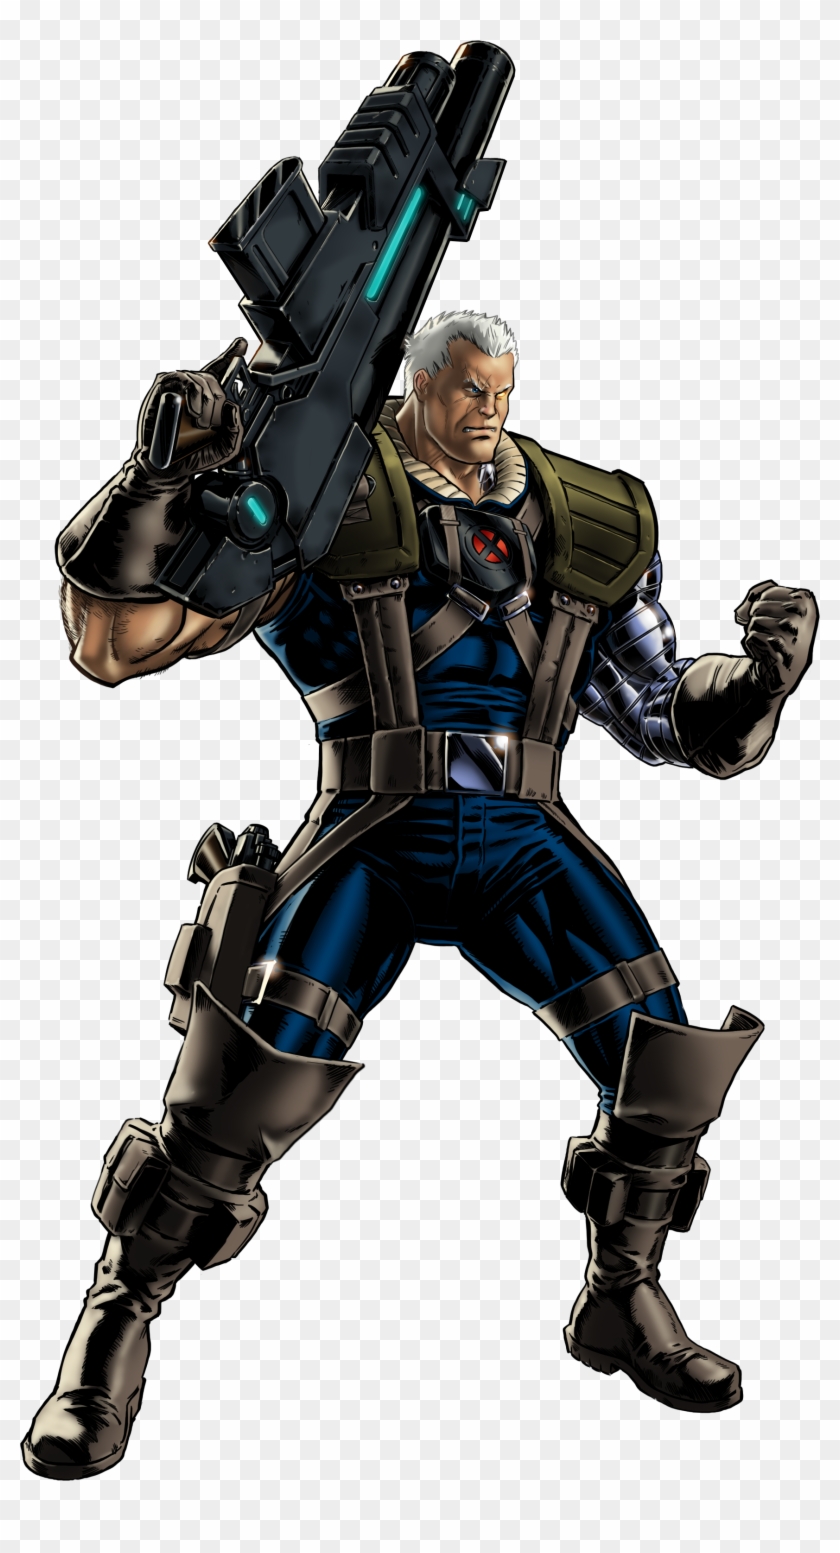 Banner Free Stock Cable Nathan Summers Earth Comicsanity - Cable Marvel Avengers Alliance Clipart #297218